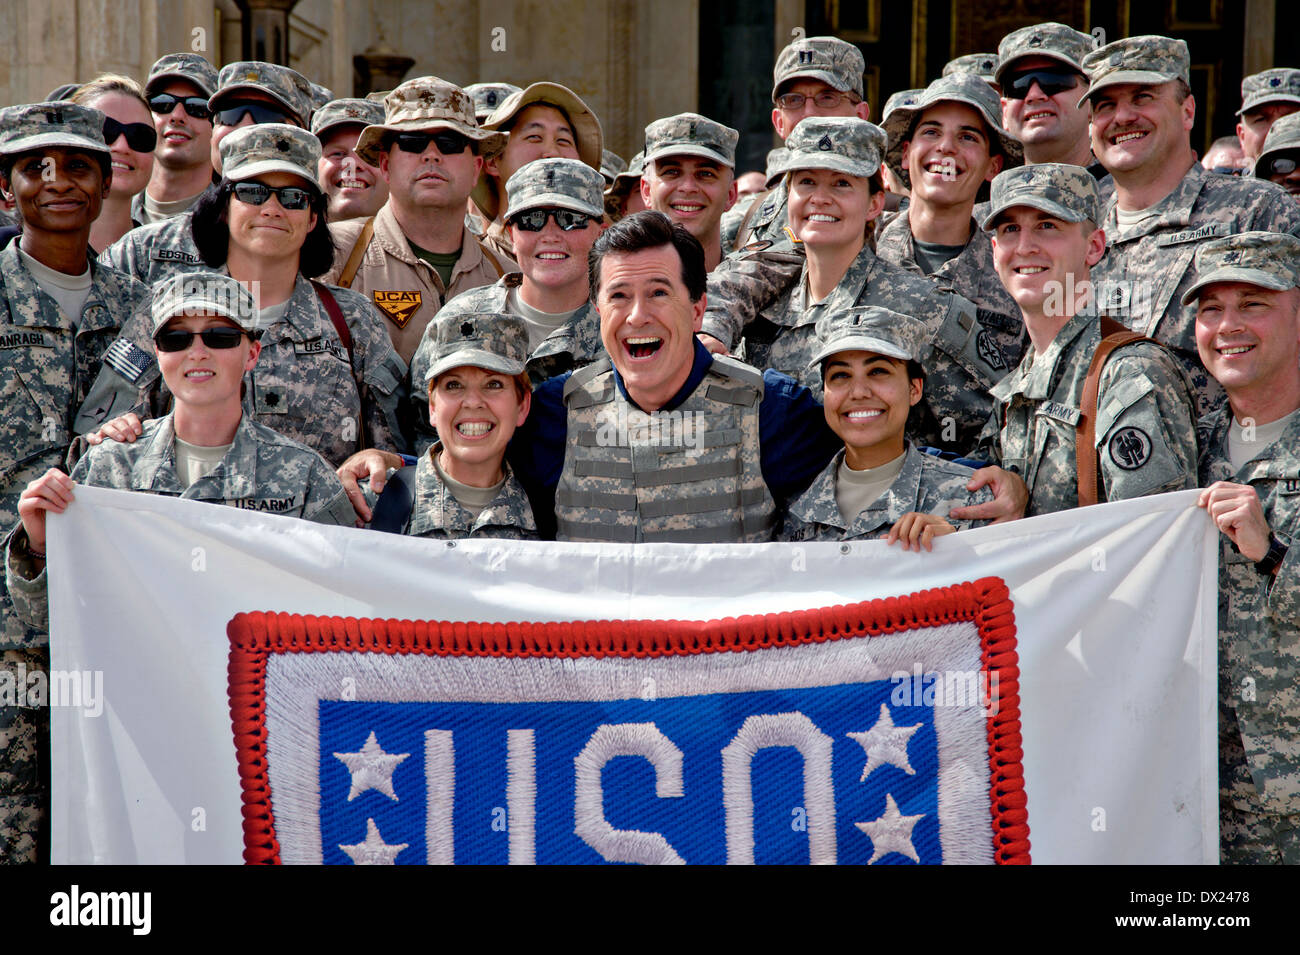 Comedian Stephen Colbert poses for a photo with service members during his USO tour at Camp Victory's Al Faw Palace June 5, 2009 in Baghdad, Iraq. Stock Photo